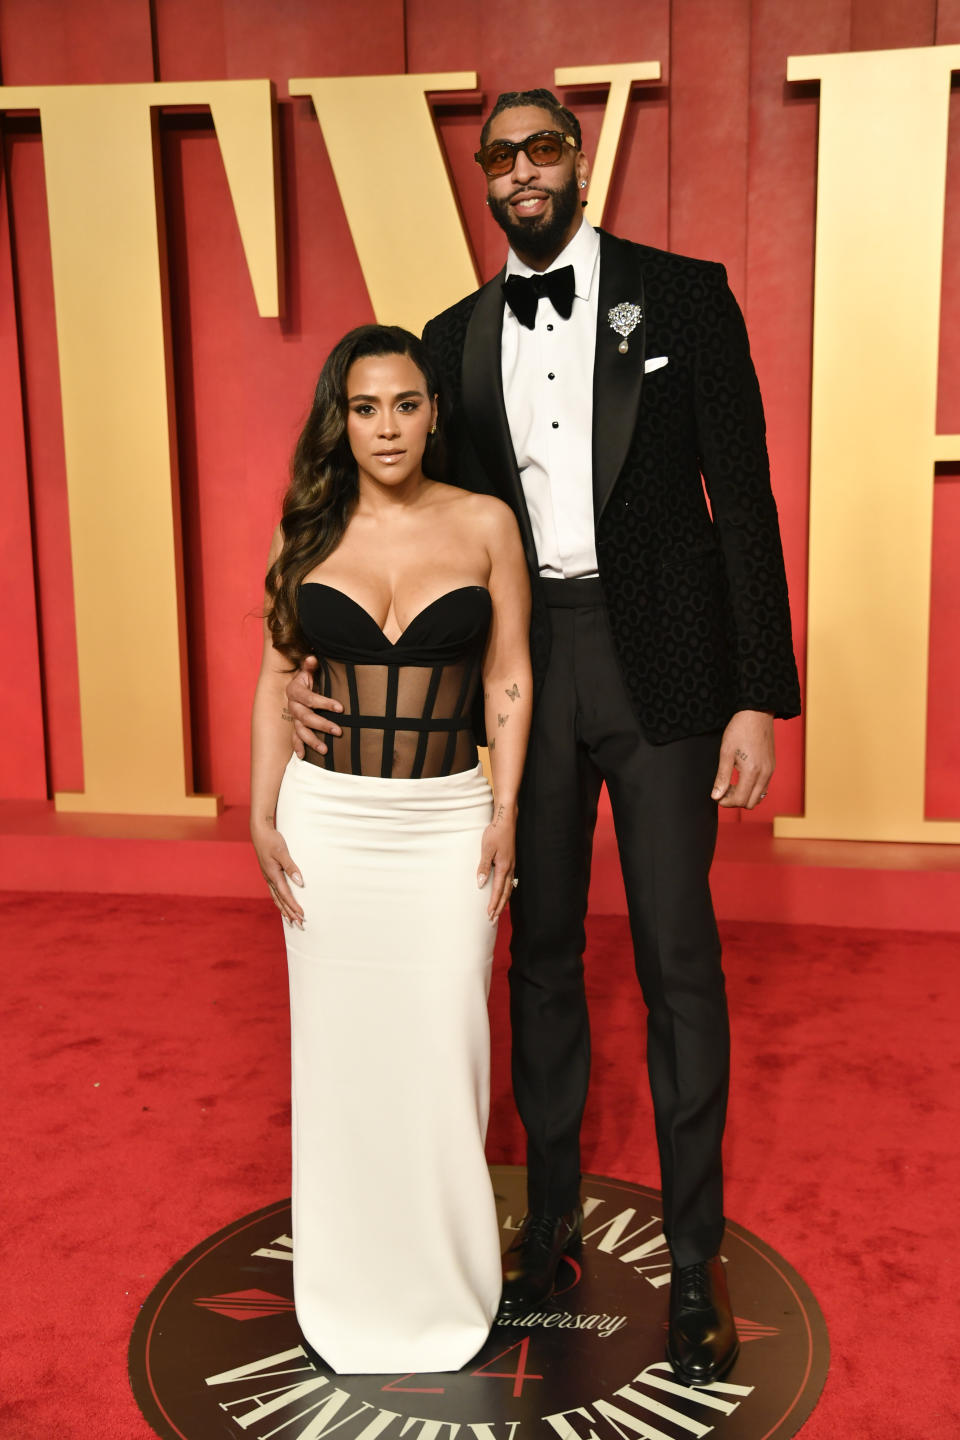 Los Angeles Lakers Anthony Davis and wife, Marlen Davis, arrive at the Vanity Fair Oscar Party on Sunday, March 10, 2024, at the Wallis Annenberg Center for the Performing Arts in Beverly Hills, Calif. (Photo by Evan Agostini/Invision/AP)